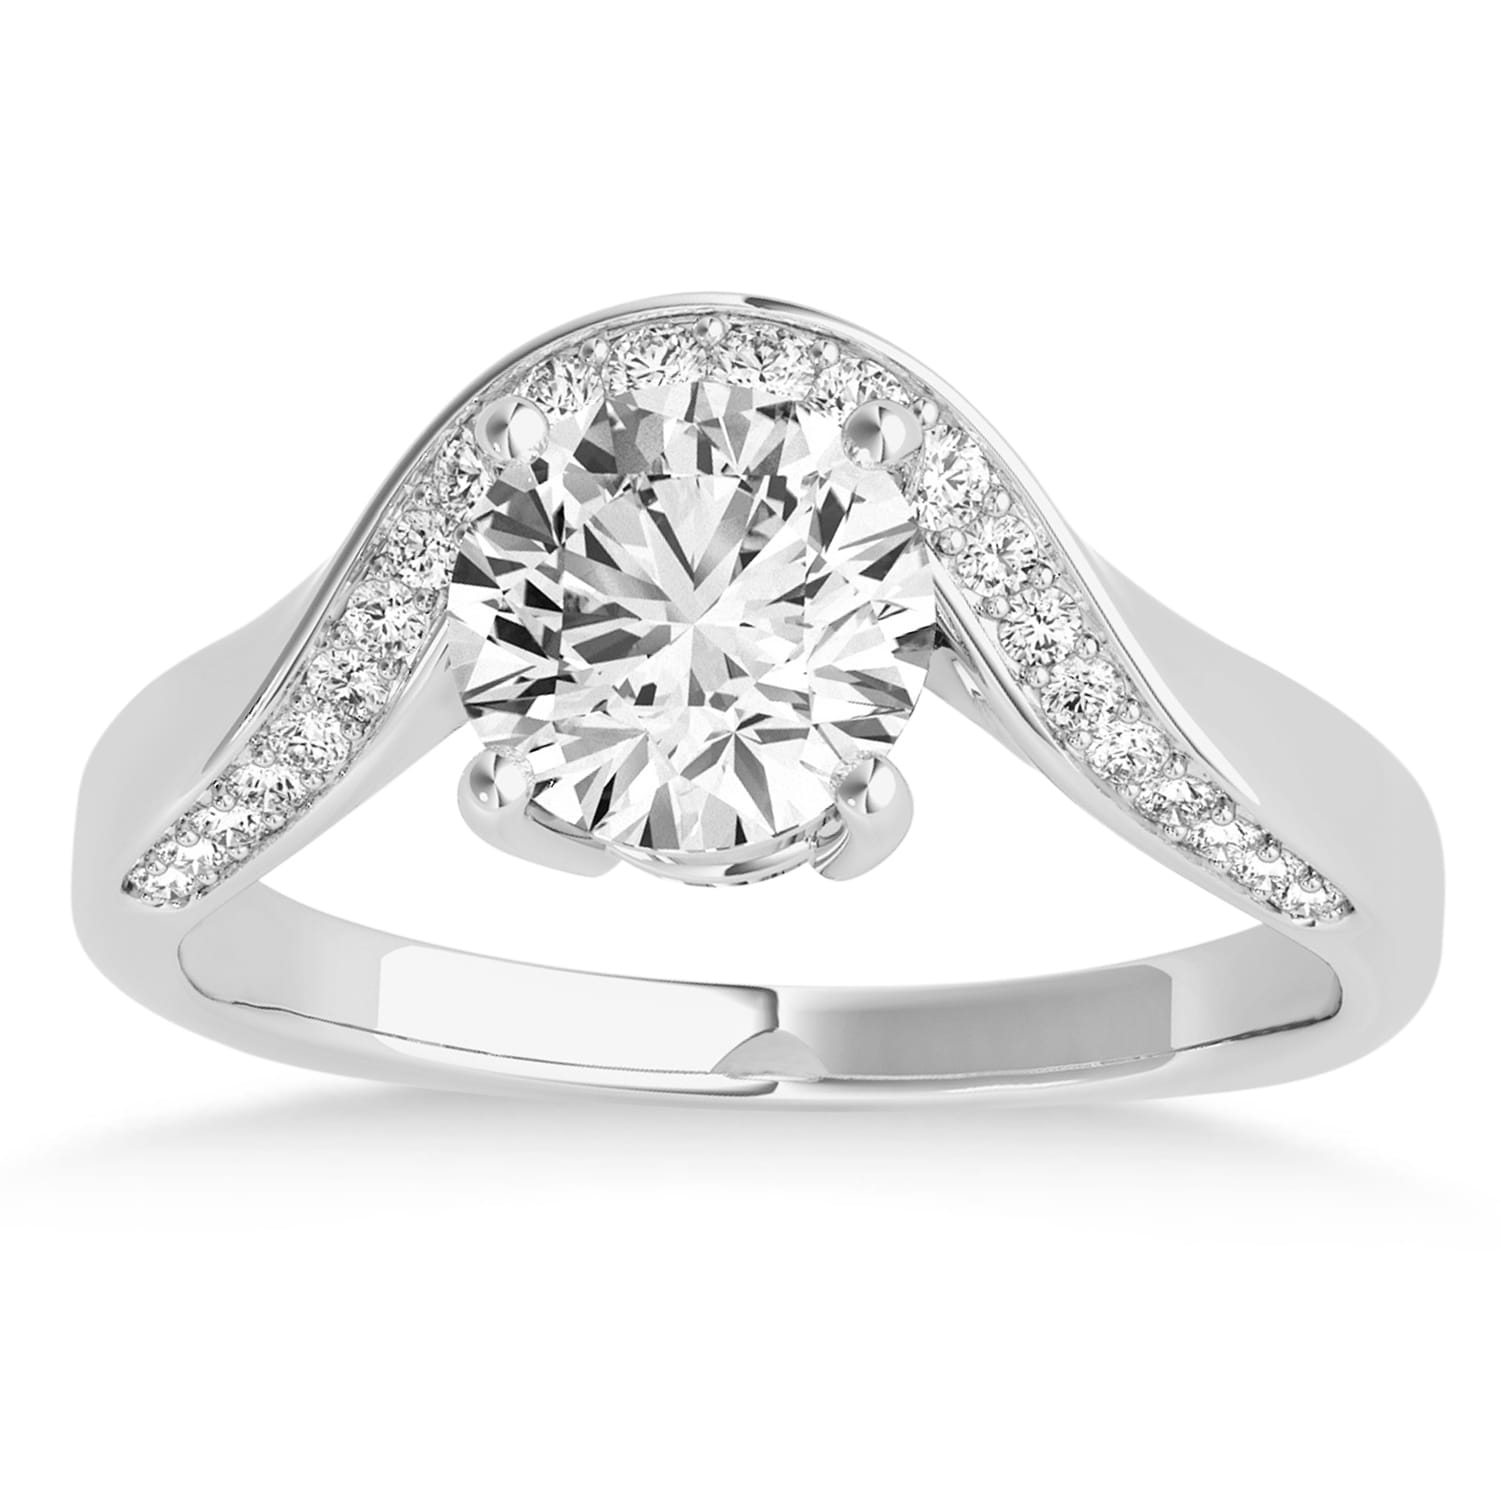 Diamond Euro Shank Curved Engagement Ring in 14k White Gold (0.16ct)